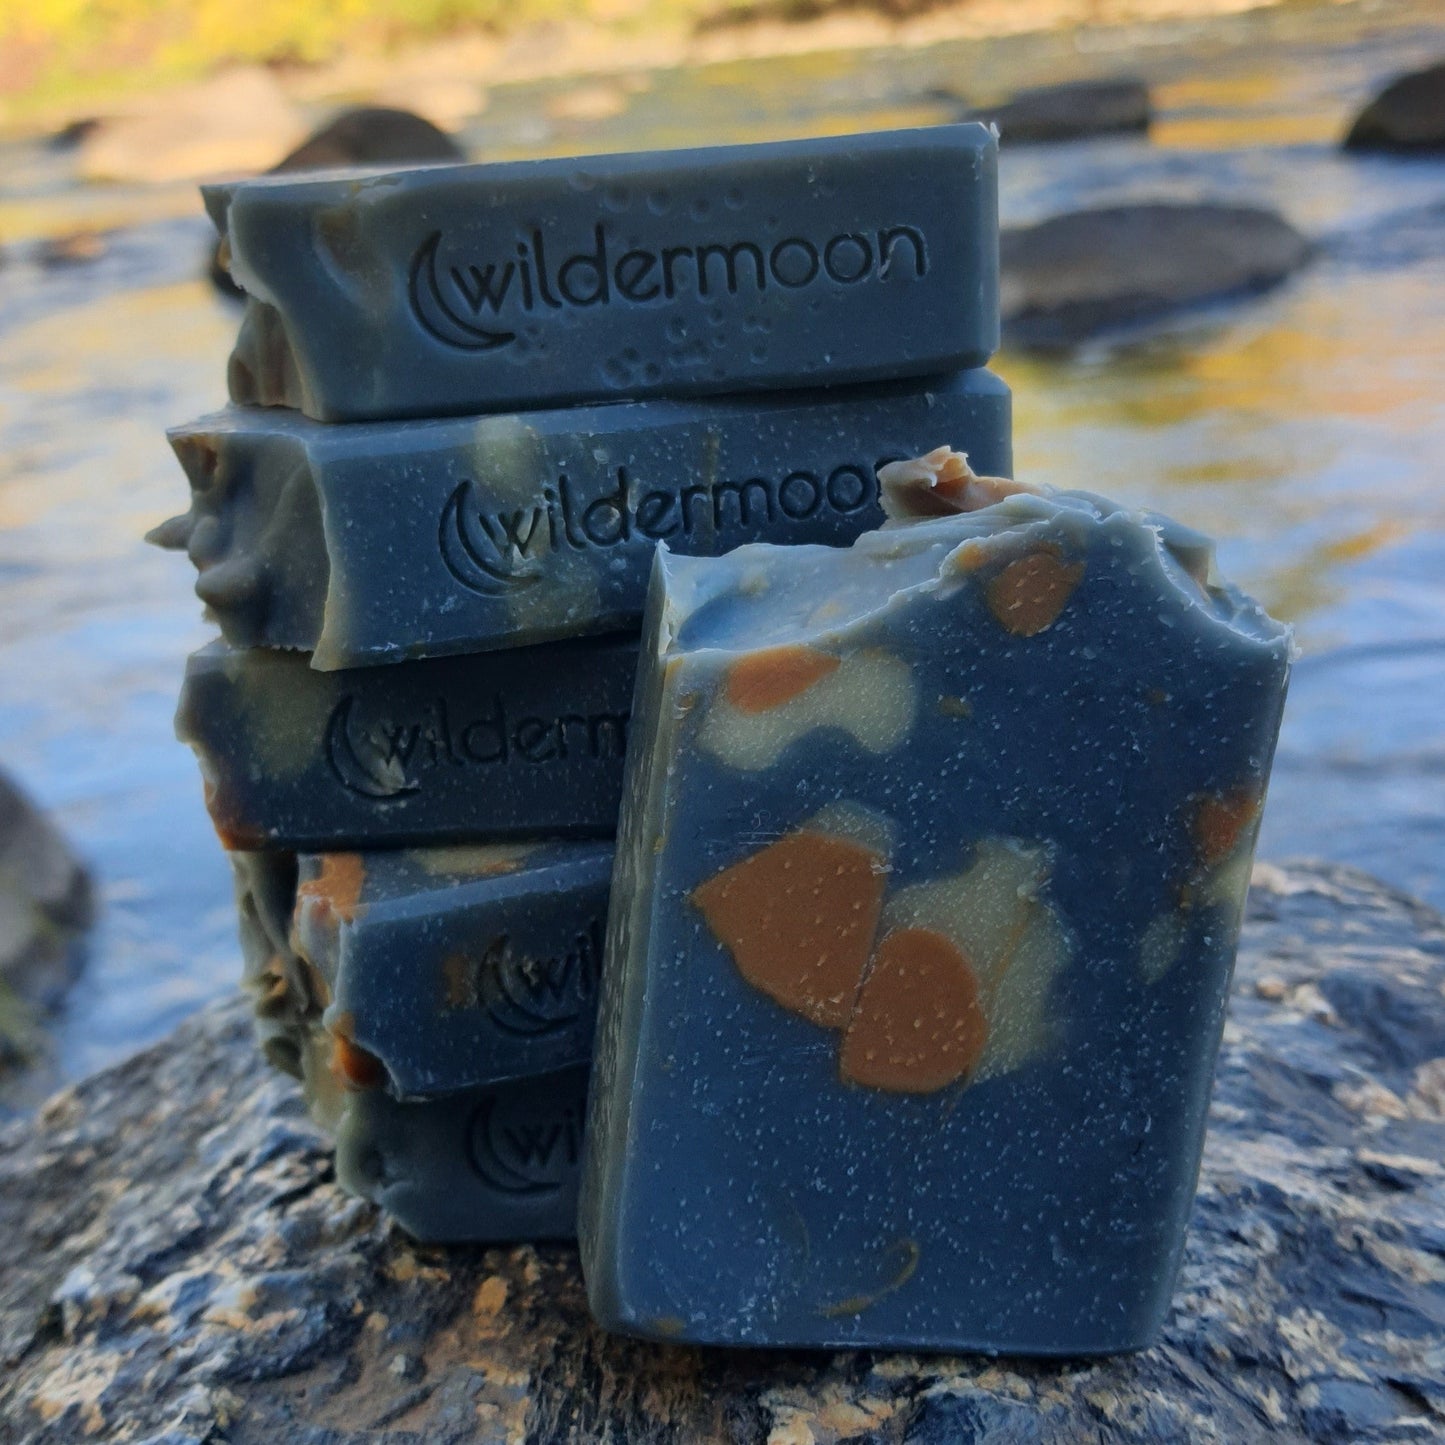 Apothecary artisan soap. Rectangular navy blue soap with orange and white design and wildermoon logo stamp on side